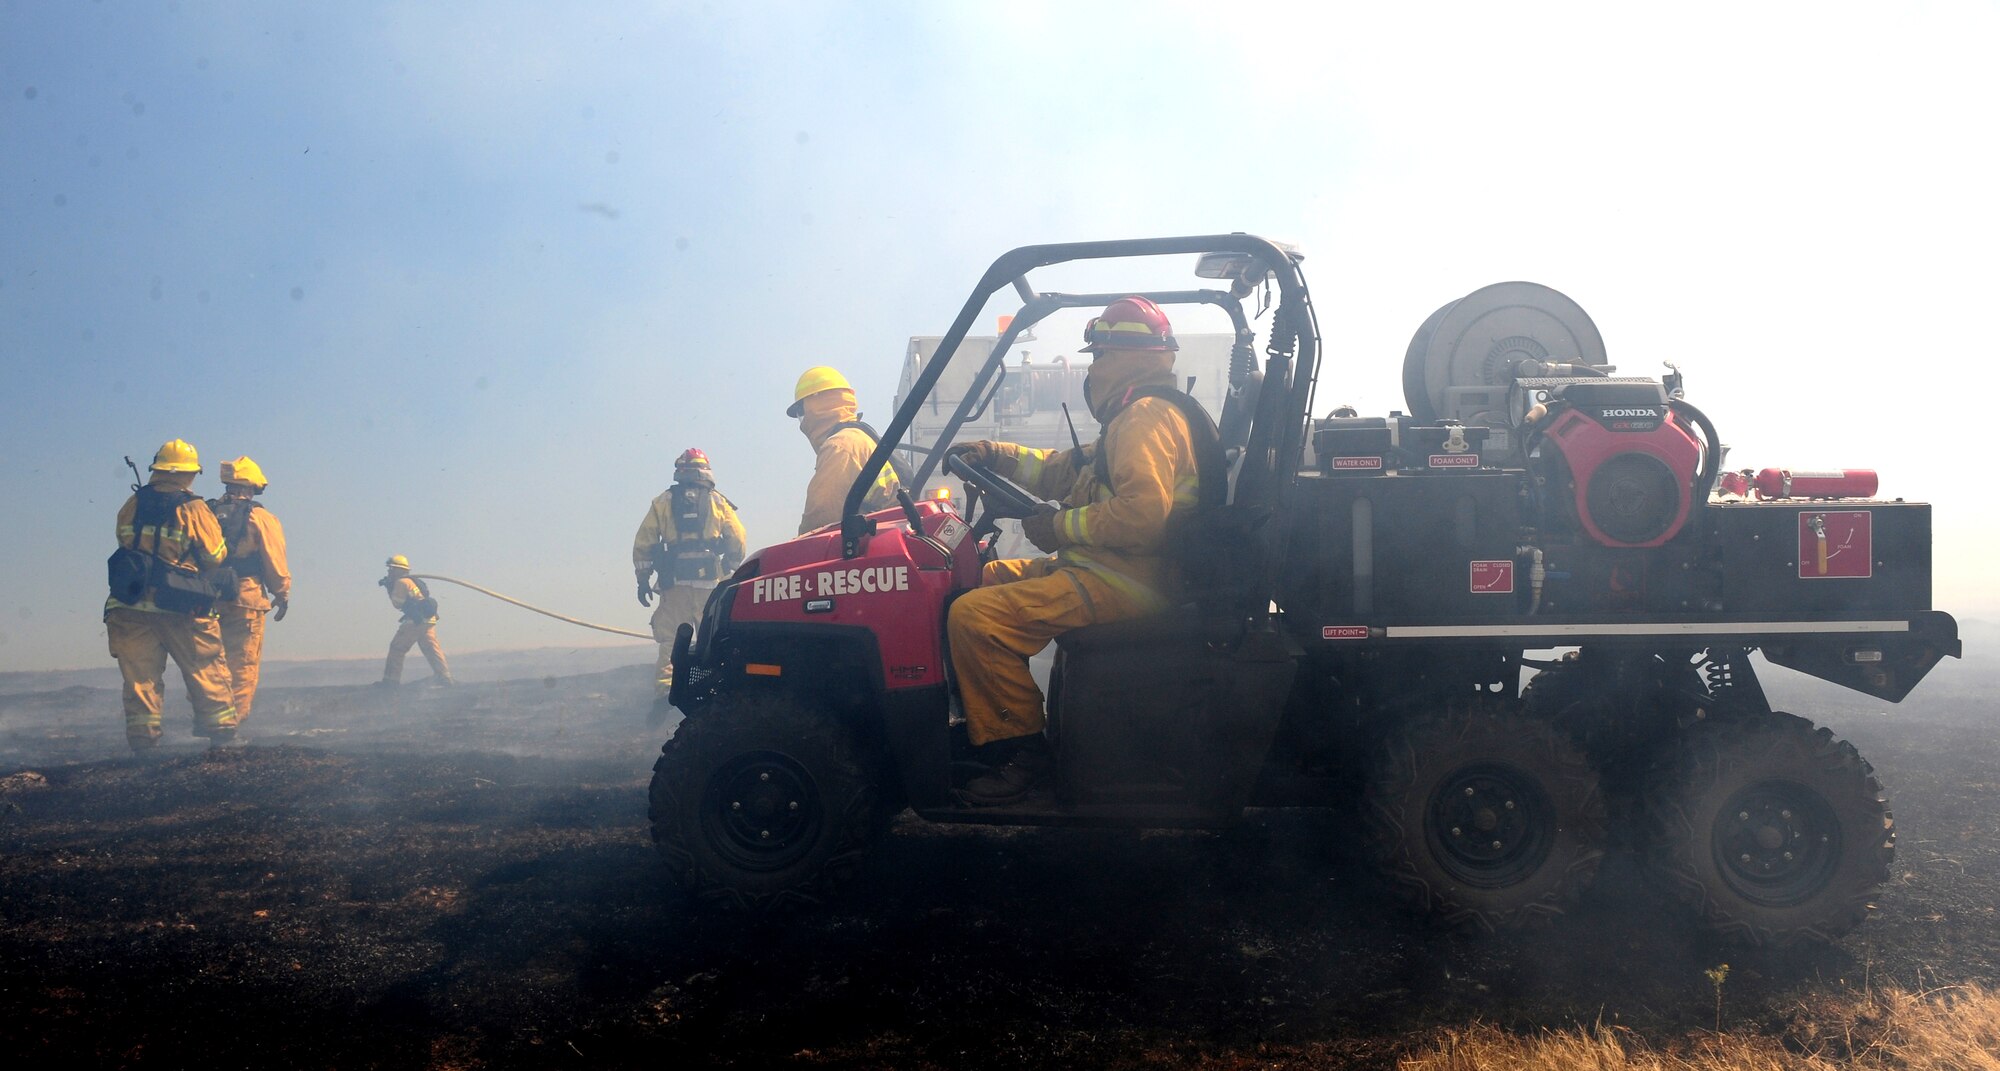 Beale Airmen utilize a multitude of vehicles to contain a prescribed burn at the M-60 firing range on Beale Air Force Base, Calif., June 27, 2013. The M-60 range here is more susceptible to fires due to sparks from the constant firing of weapons. (U.S. Air Force photo by Airman 1st Class Bobby Cummings/Released)